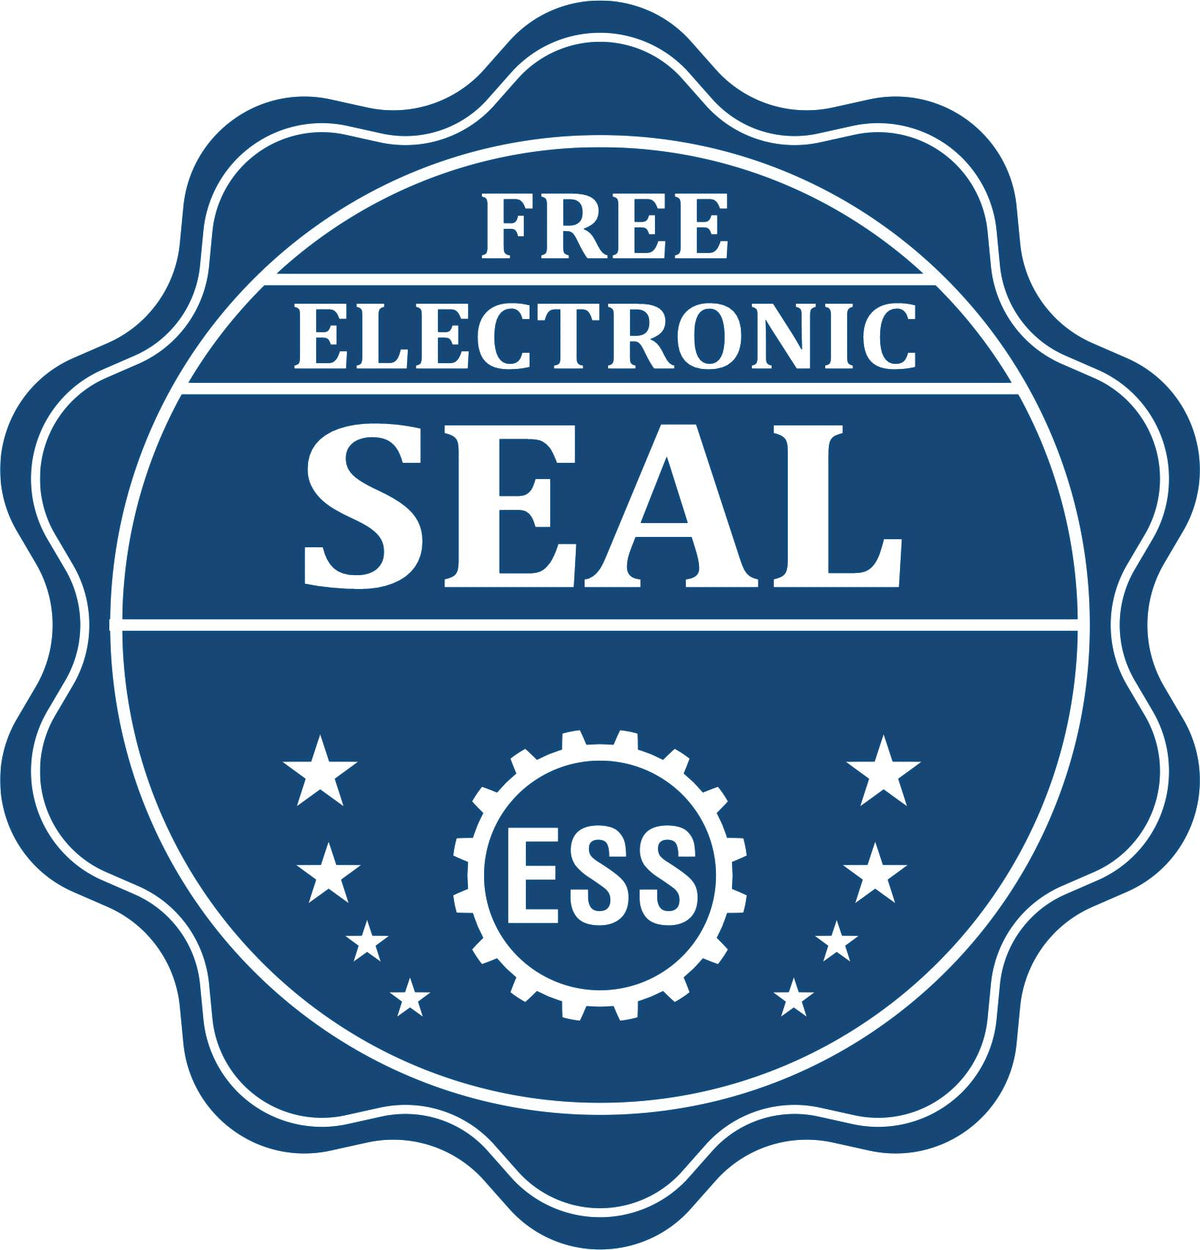 A badge showing a free electronic seal for the Long Reach Idaho Land Surveyor Seal with stars and the ESS gear on the emblem.